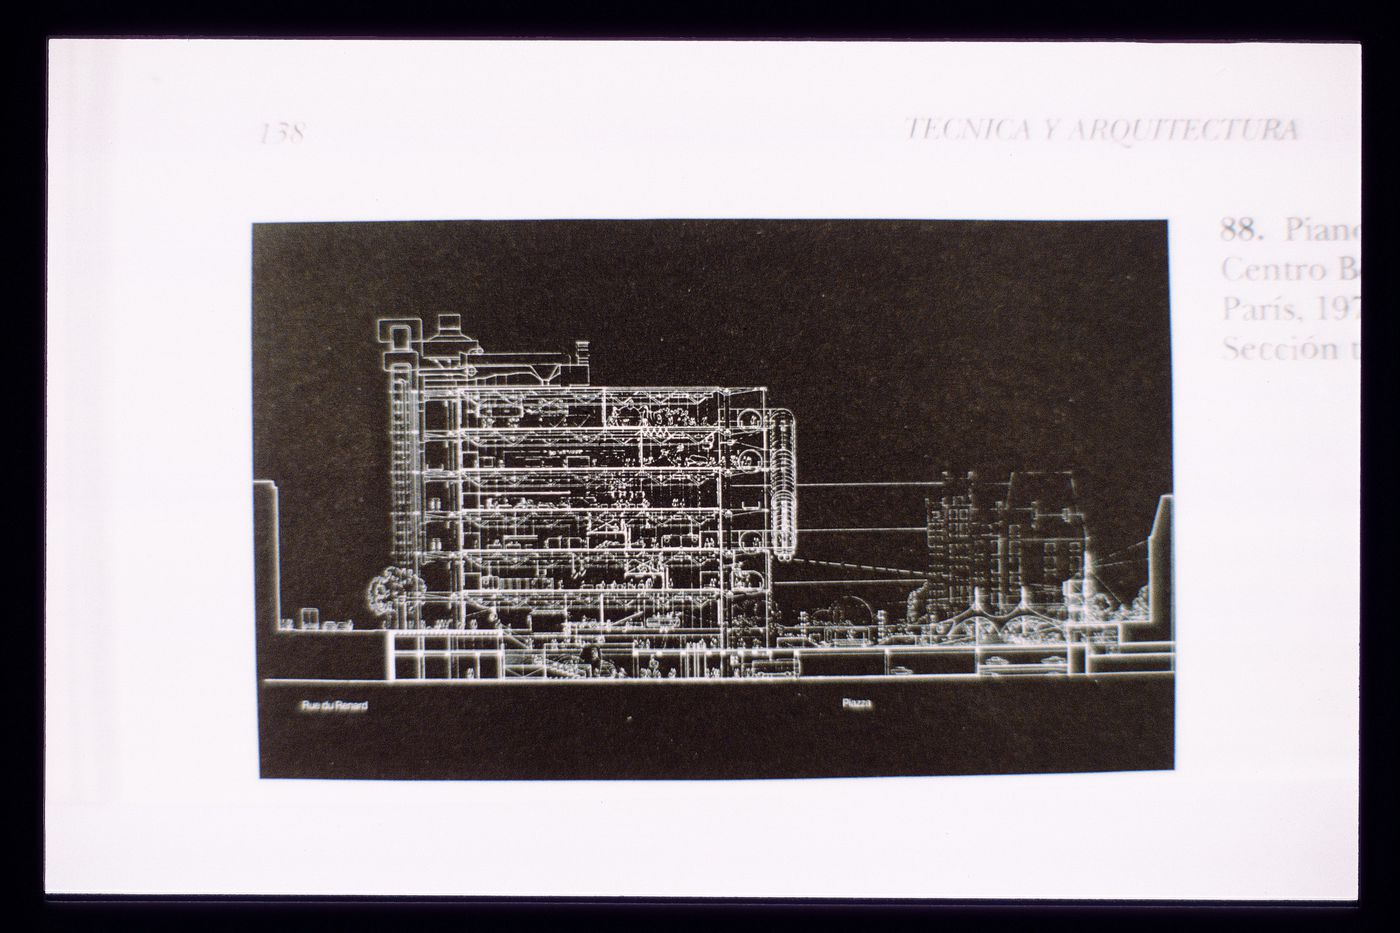 Slide of a drawing for Centre Georges Pompidou, Paris, by Renzo Piano and Richard Rogers